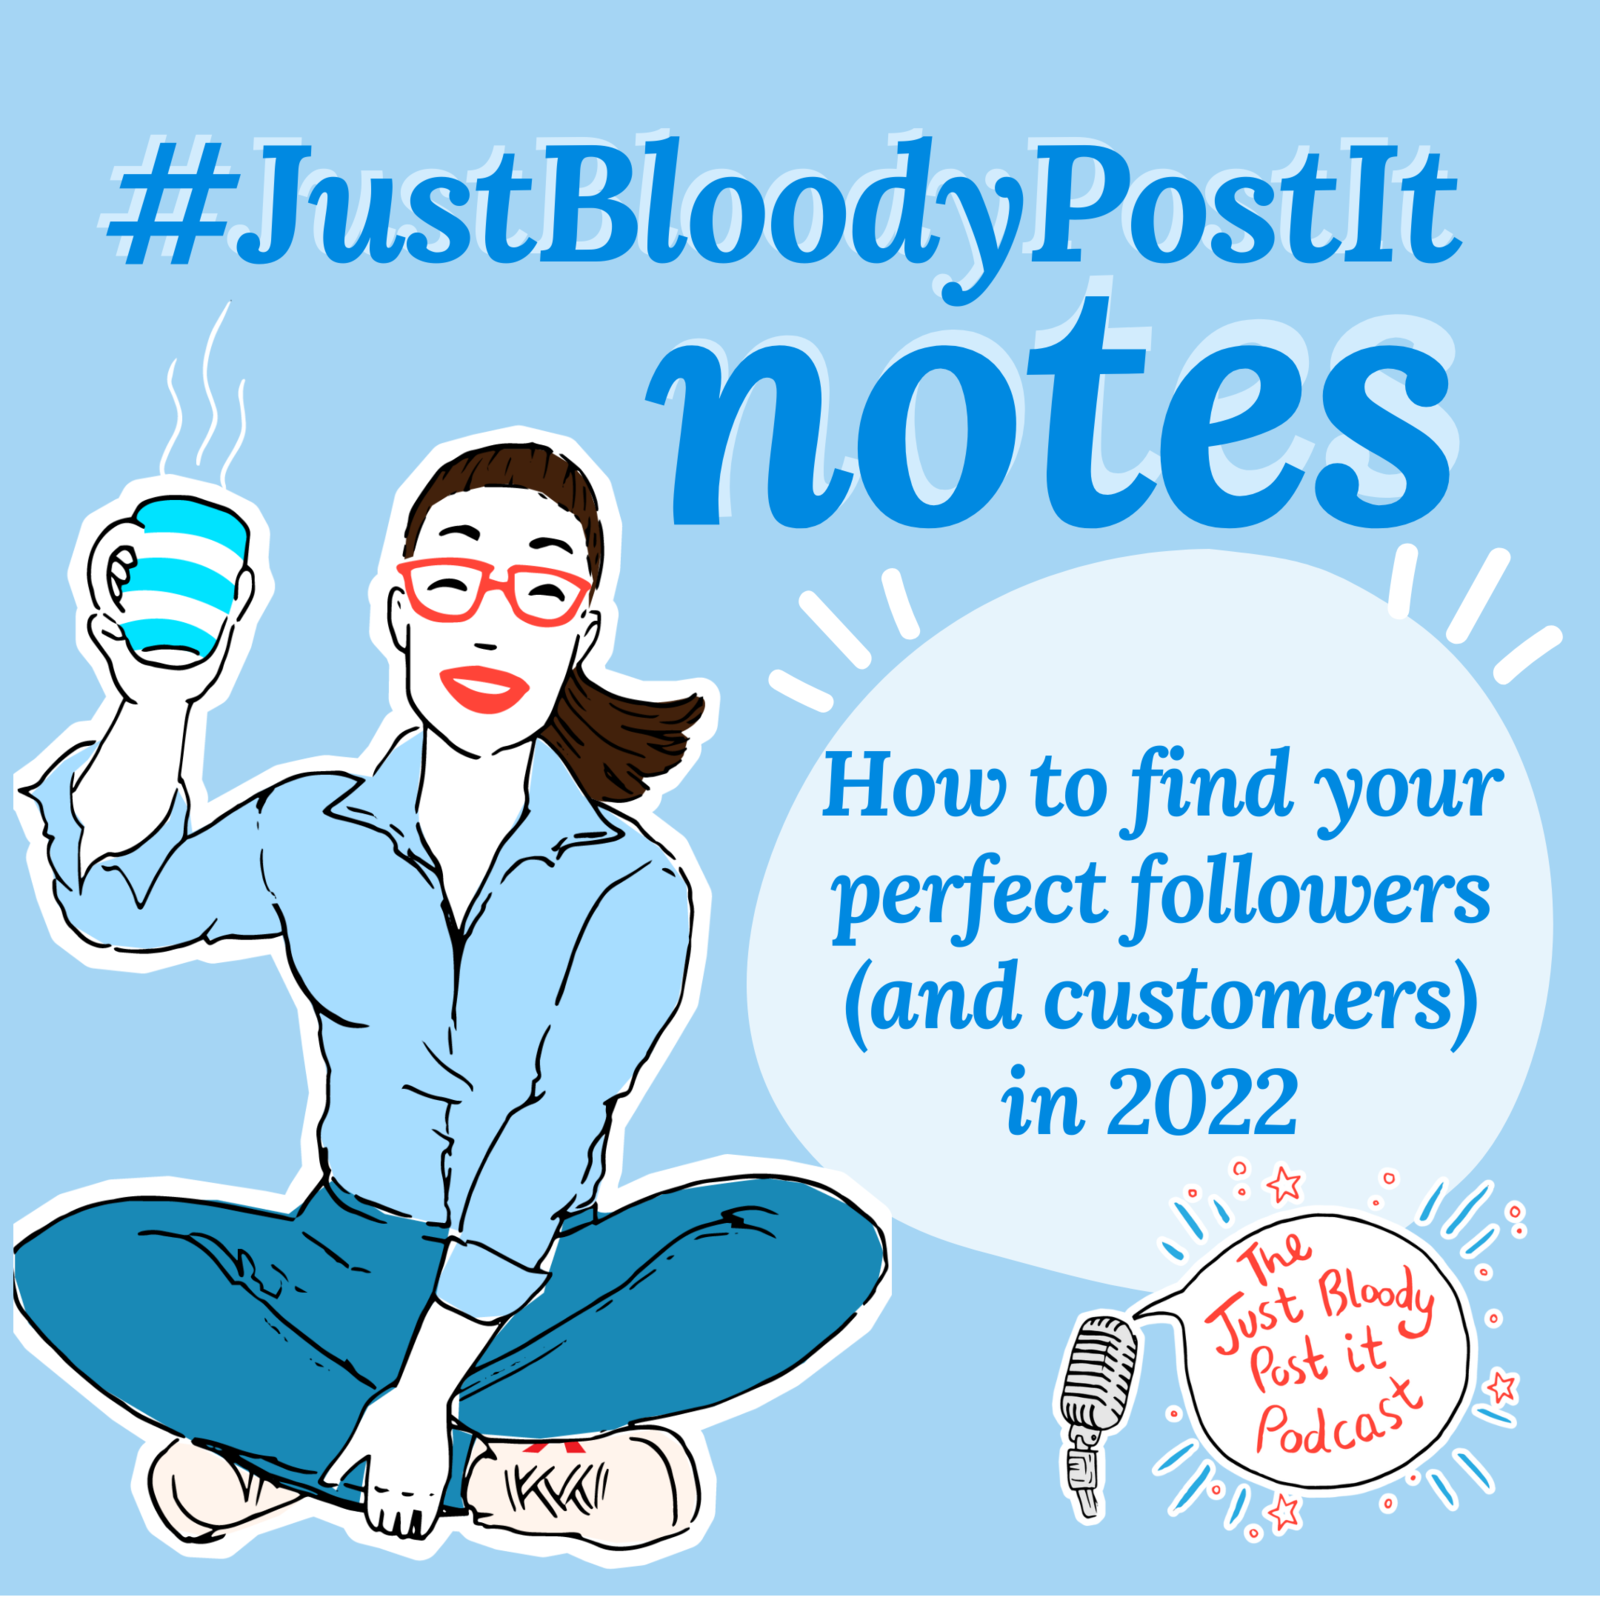 S2 Ep40: A #JustBloodyPostIt Note about how to find your ideal followers (and customers) in 2022